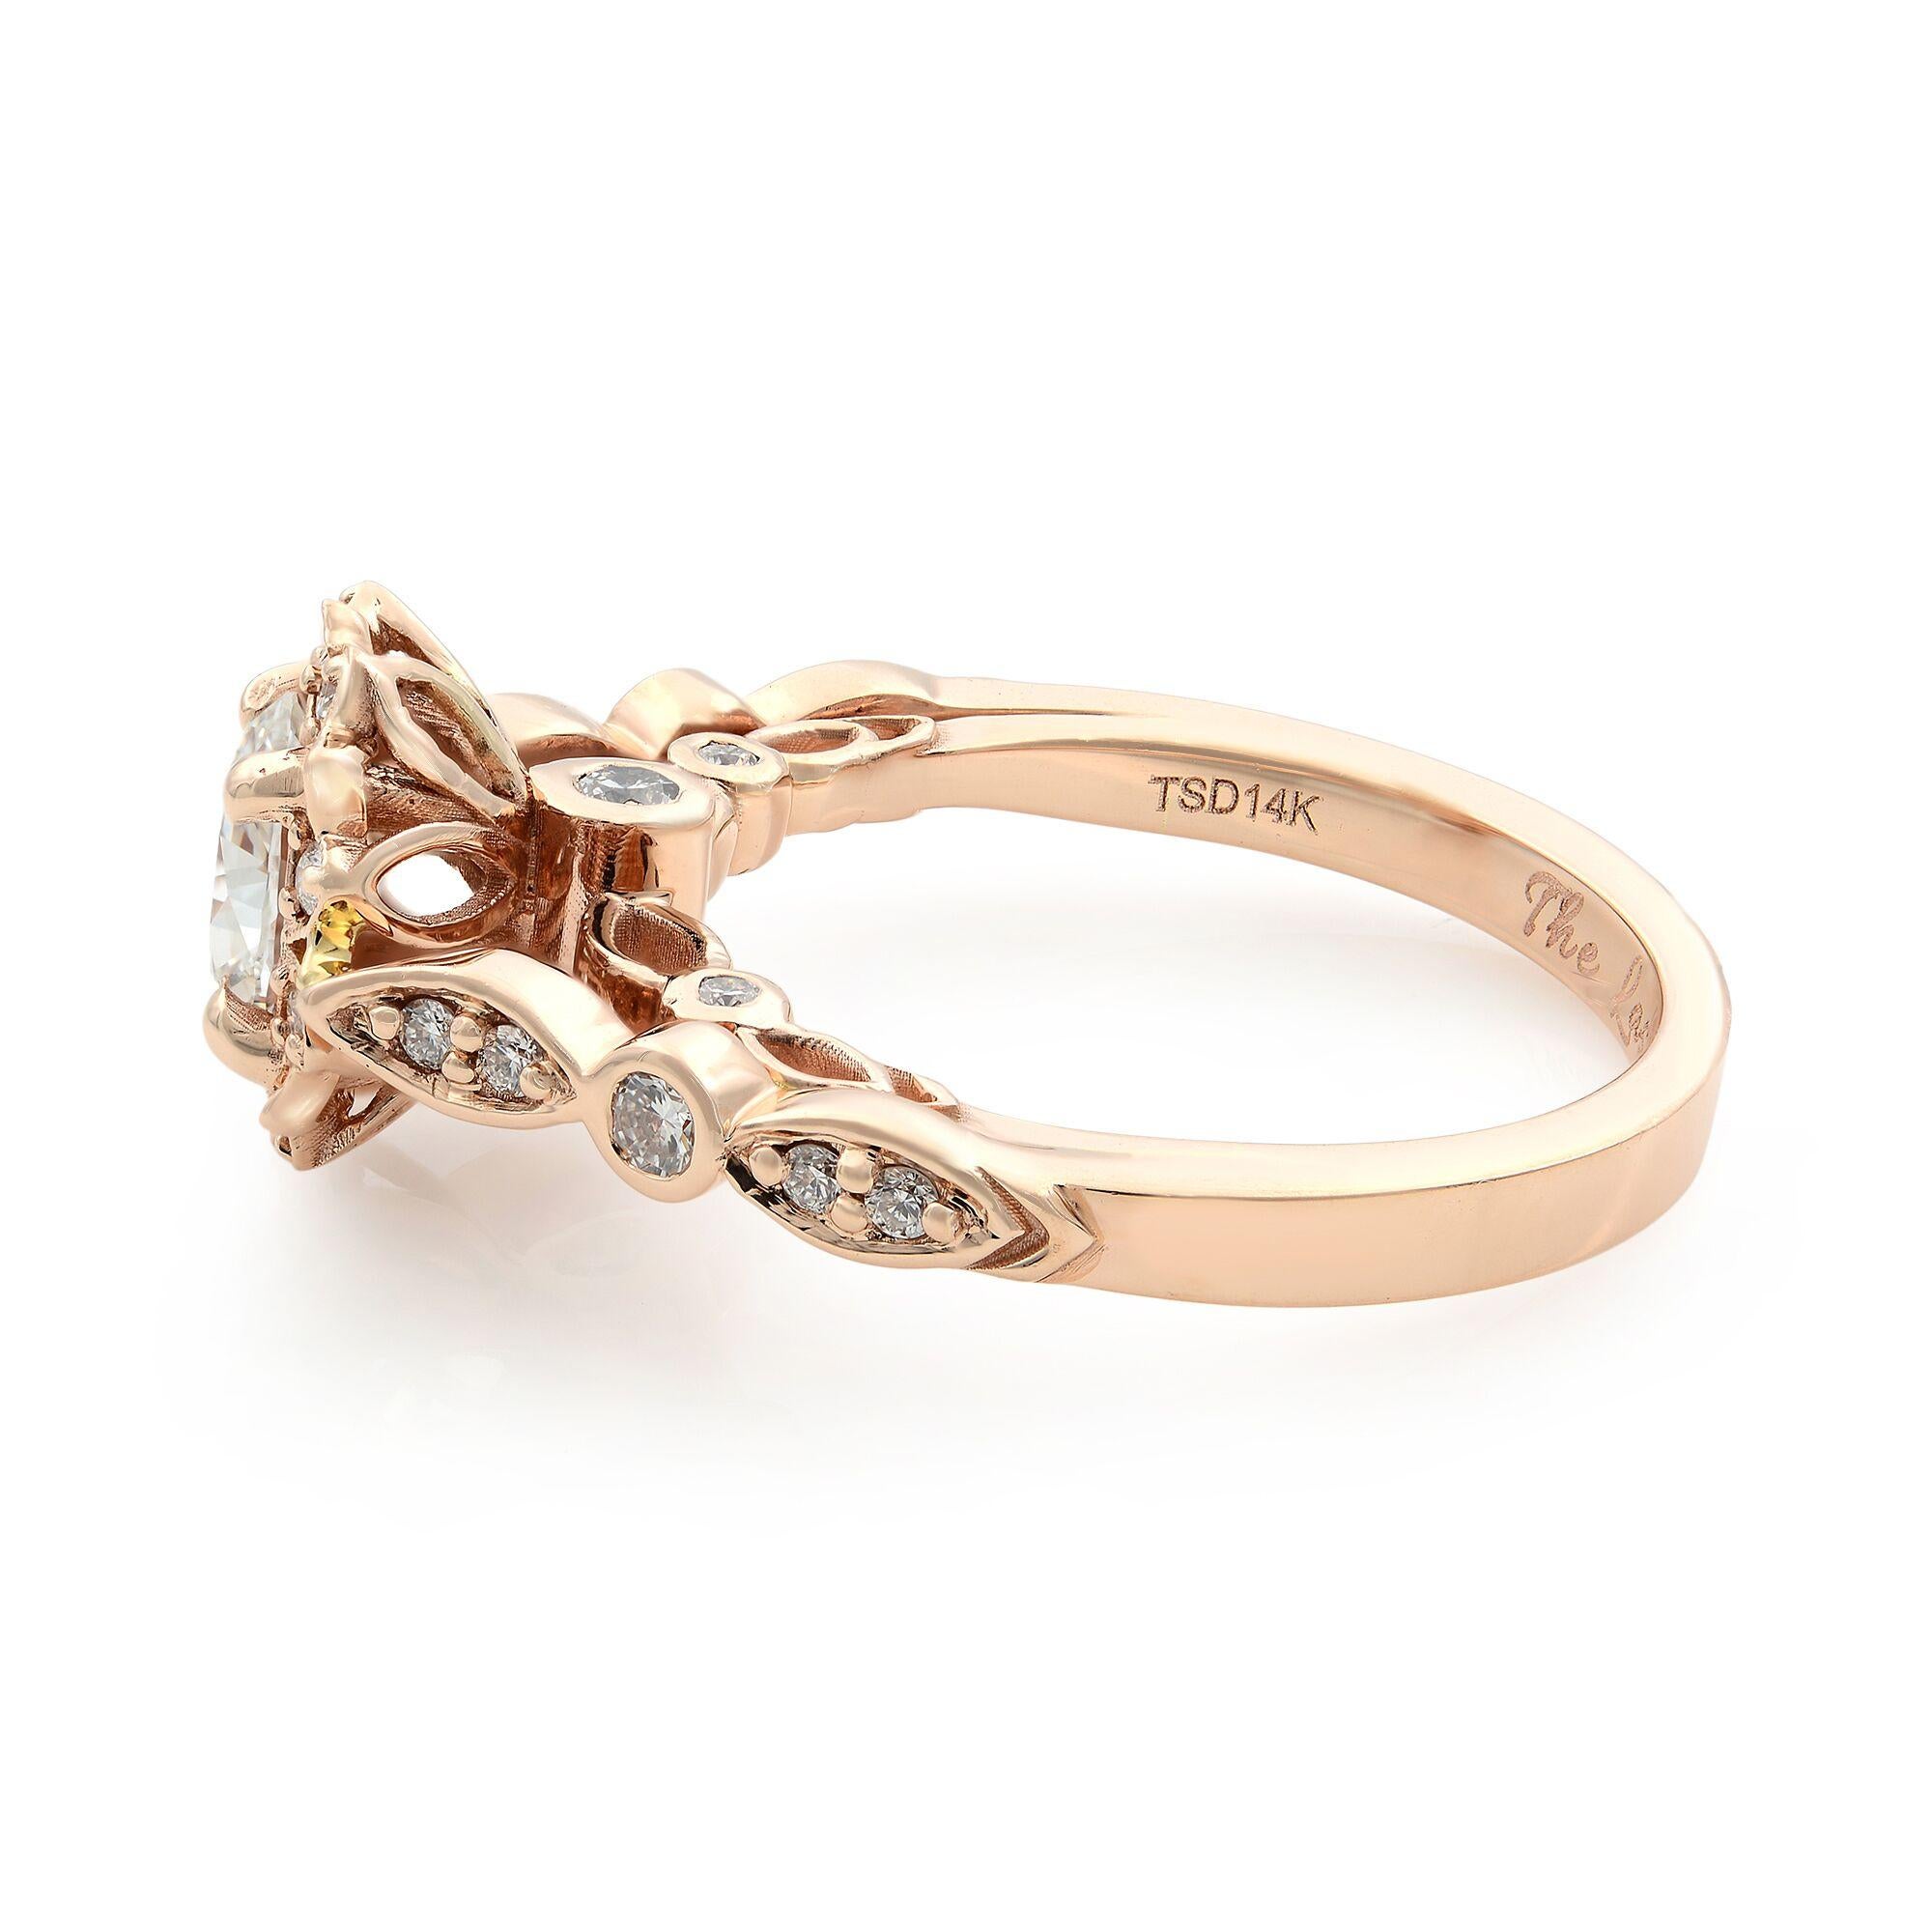 This is a rose gold oval halo engagement ring. Twenty-four tiny round cut diamonds, at approximately 0.25 carat total weight, are beautifully crafted in quality 14 karat rose gold. This piece creates a dazzling display by choosing an oval center